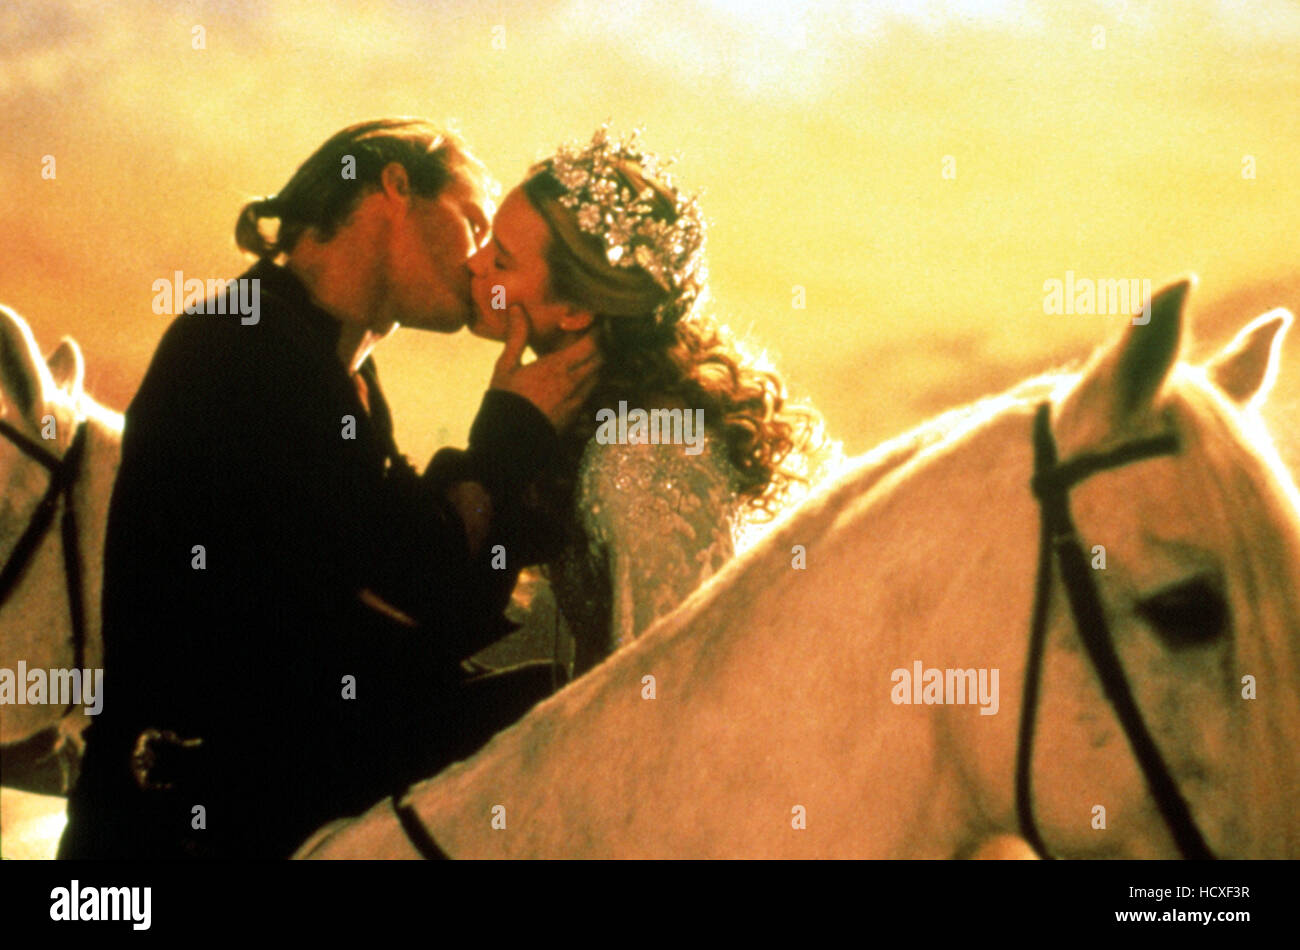 THE PRINCESS BRIDE, Cary Elwes, Robin Wright, 1987, TM & Copyright (c) 20th Century Fox Film Corp. All rights reserved." Stock Photo